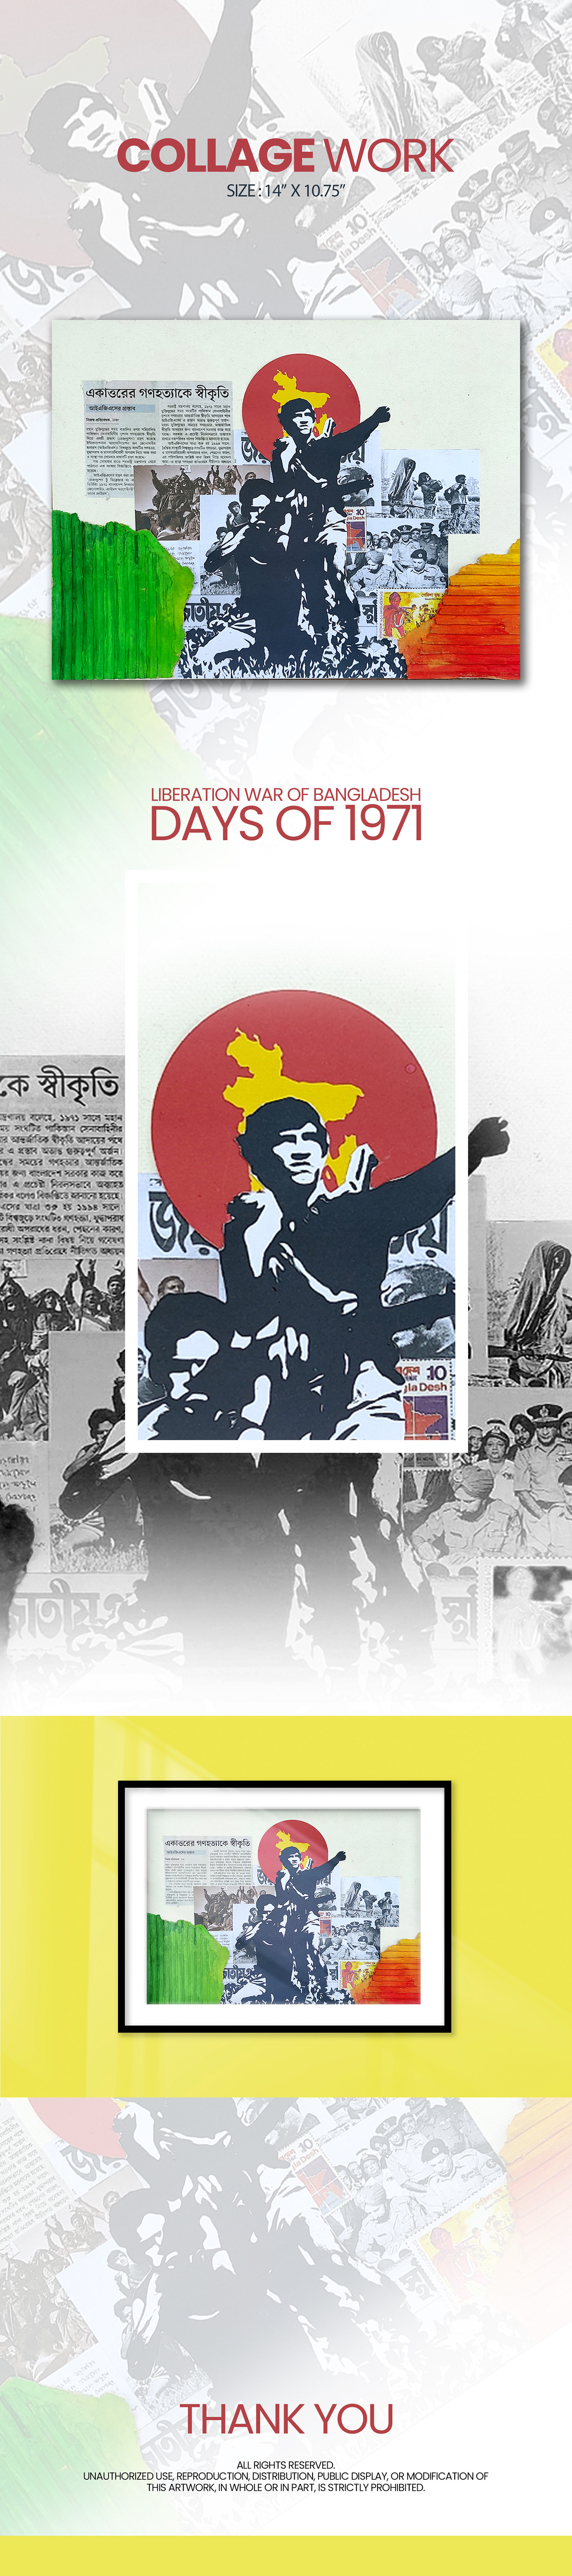 collage art collage poster artwork handmade craft newspapercollage Newspaper Collage Bangla NewsPaper papercutting